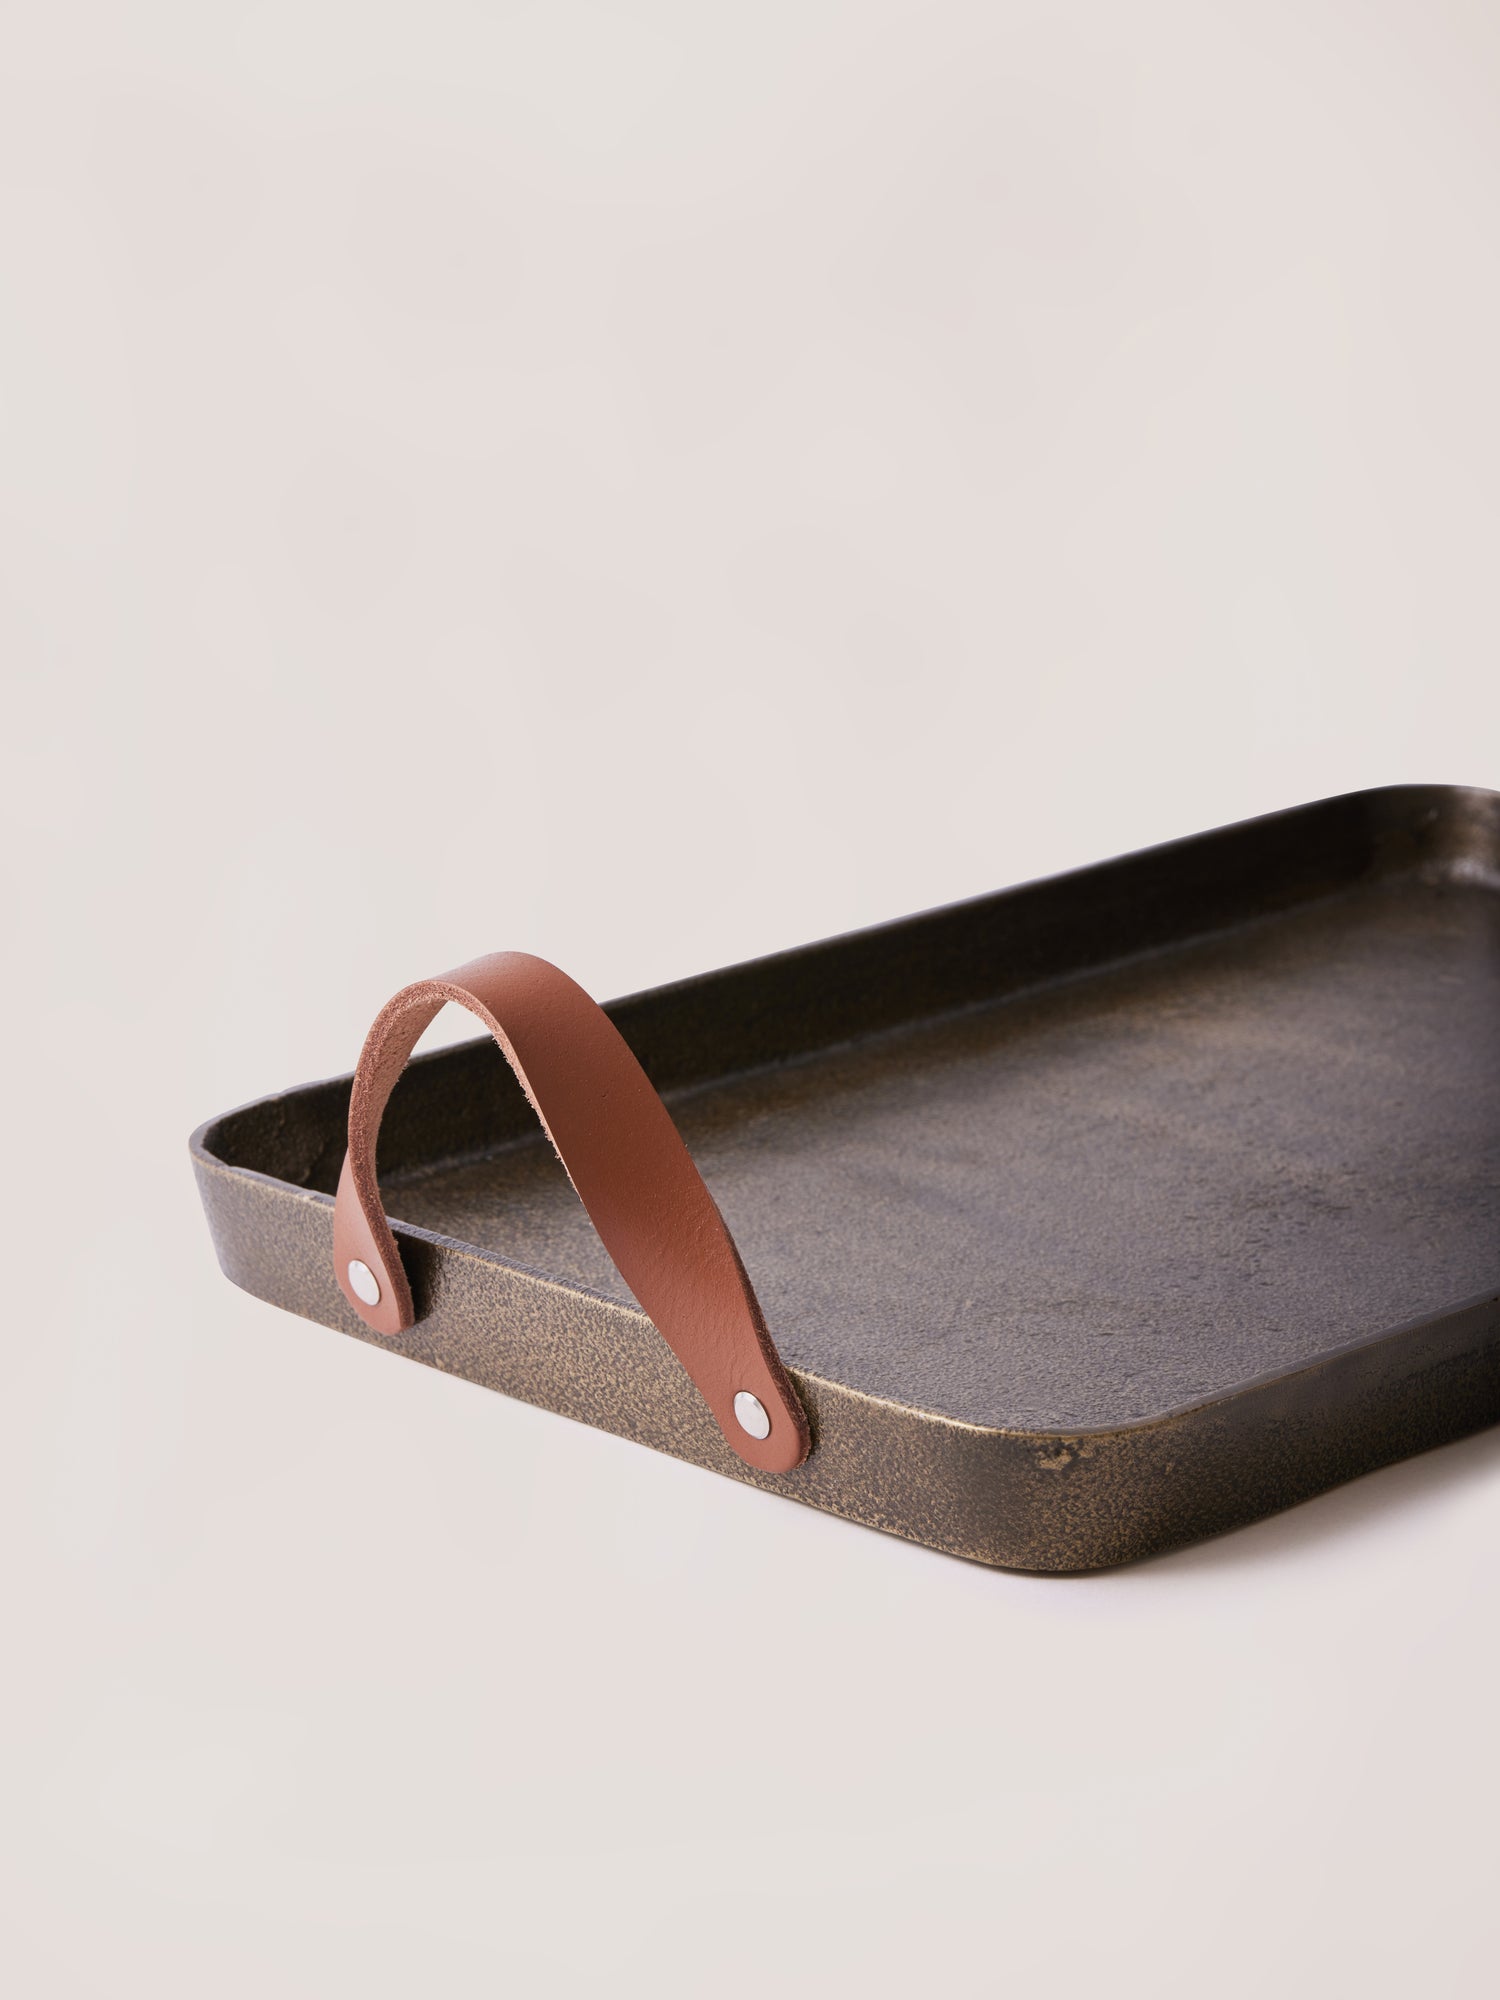 Umbra Tray with Leather Handles - Fleck